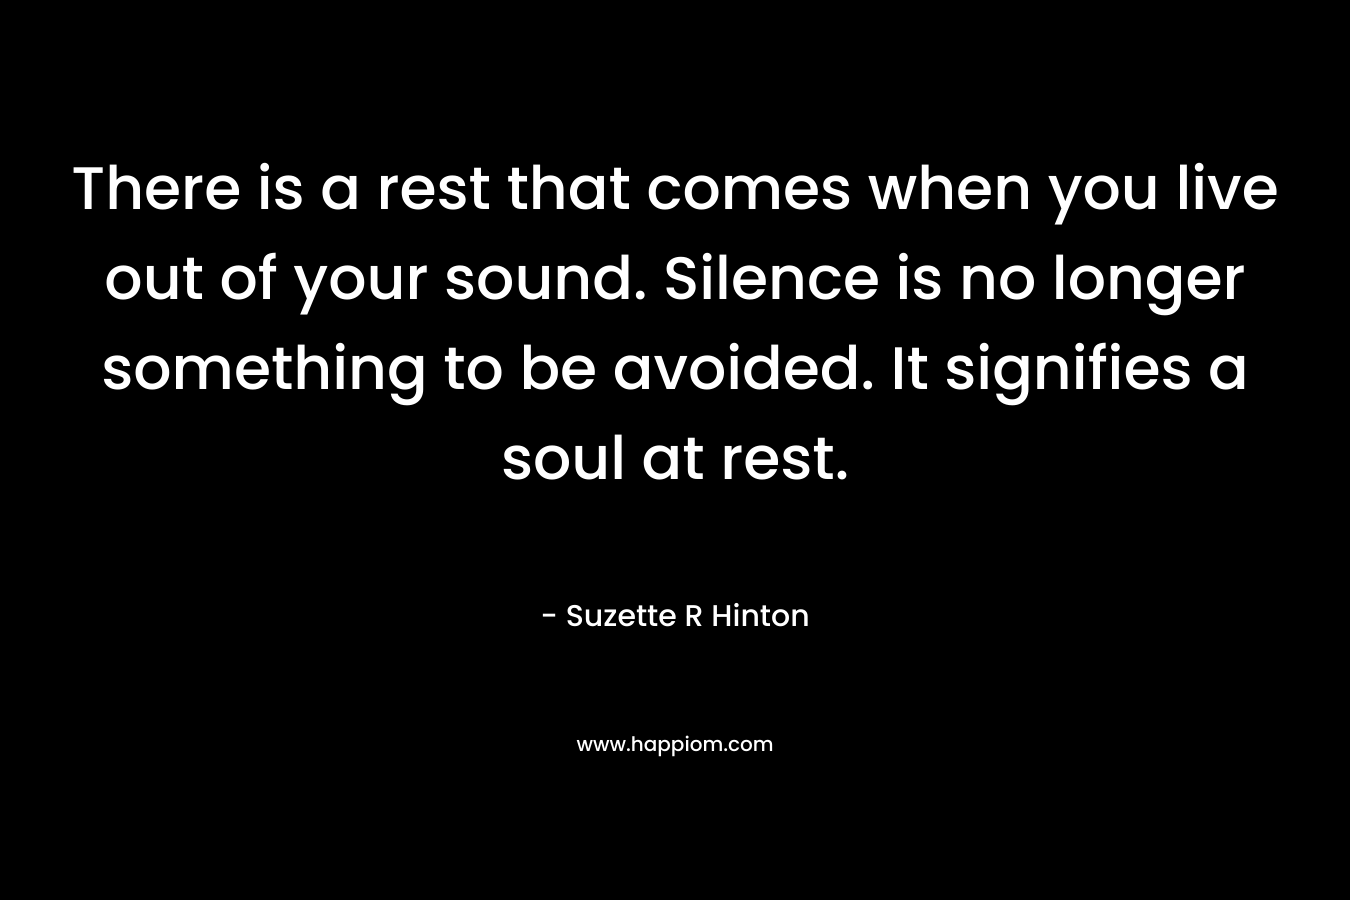 There is a rest that comes when you live out of your sound. Silence is no longer something to be avoided. It signifies a soul at rest.